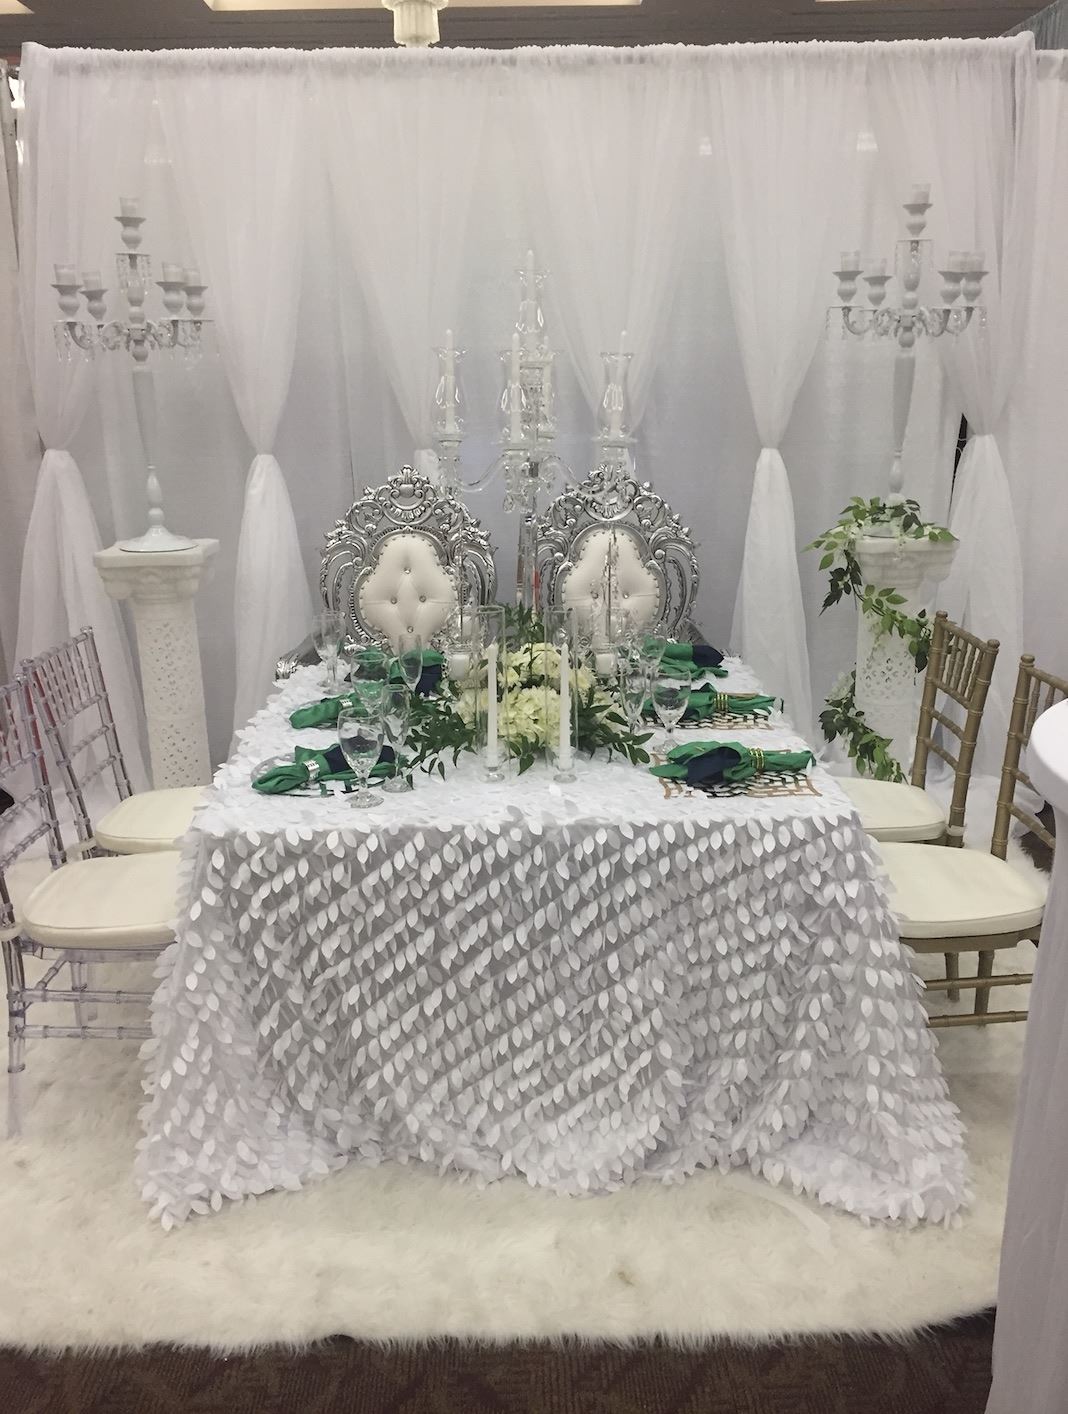 Photo of the bridal table